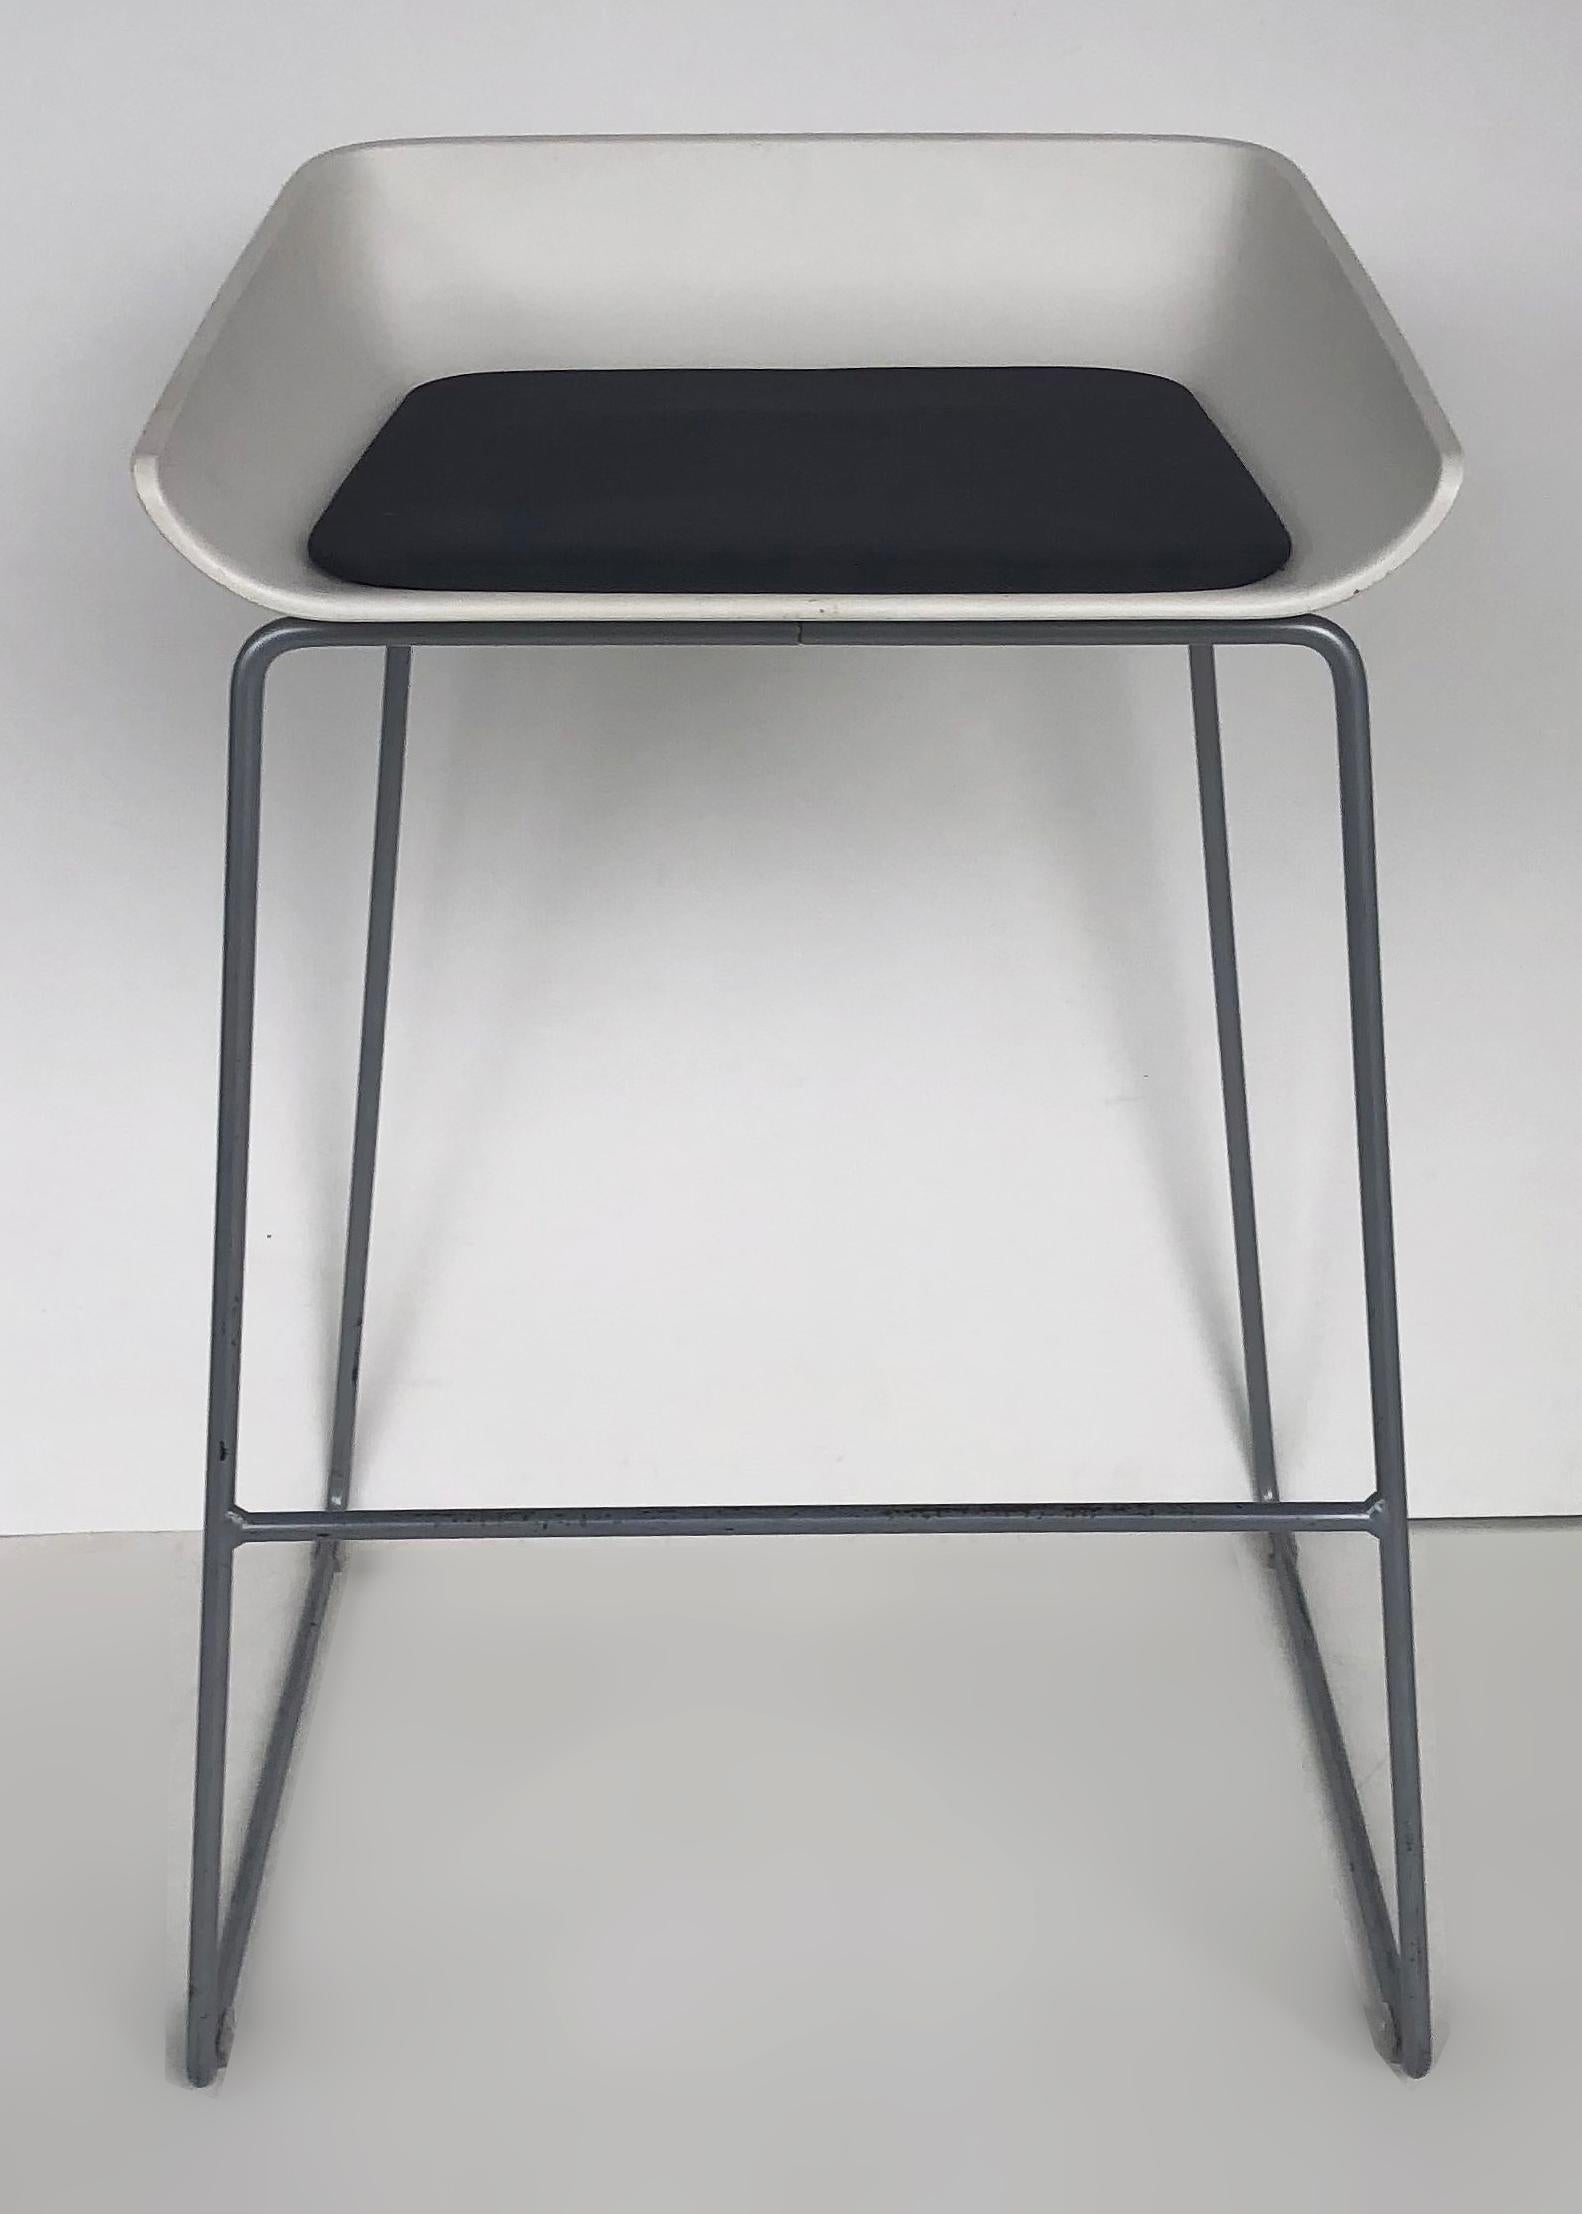 Contemporary Turnstone Scoop Bar Stools for Steelcase Furniture, Set of Four For Sale